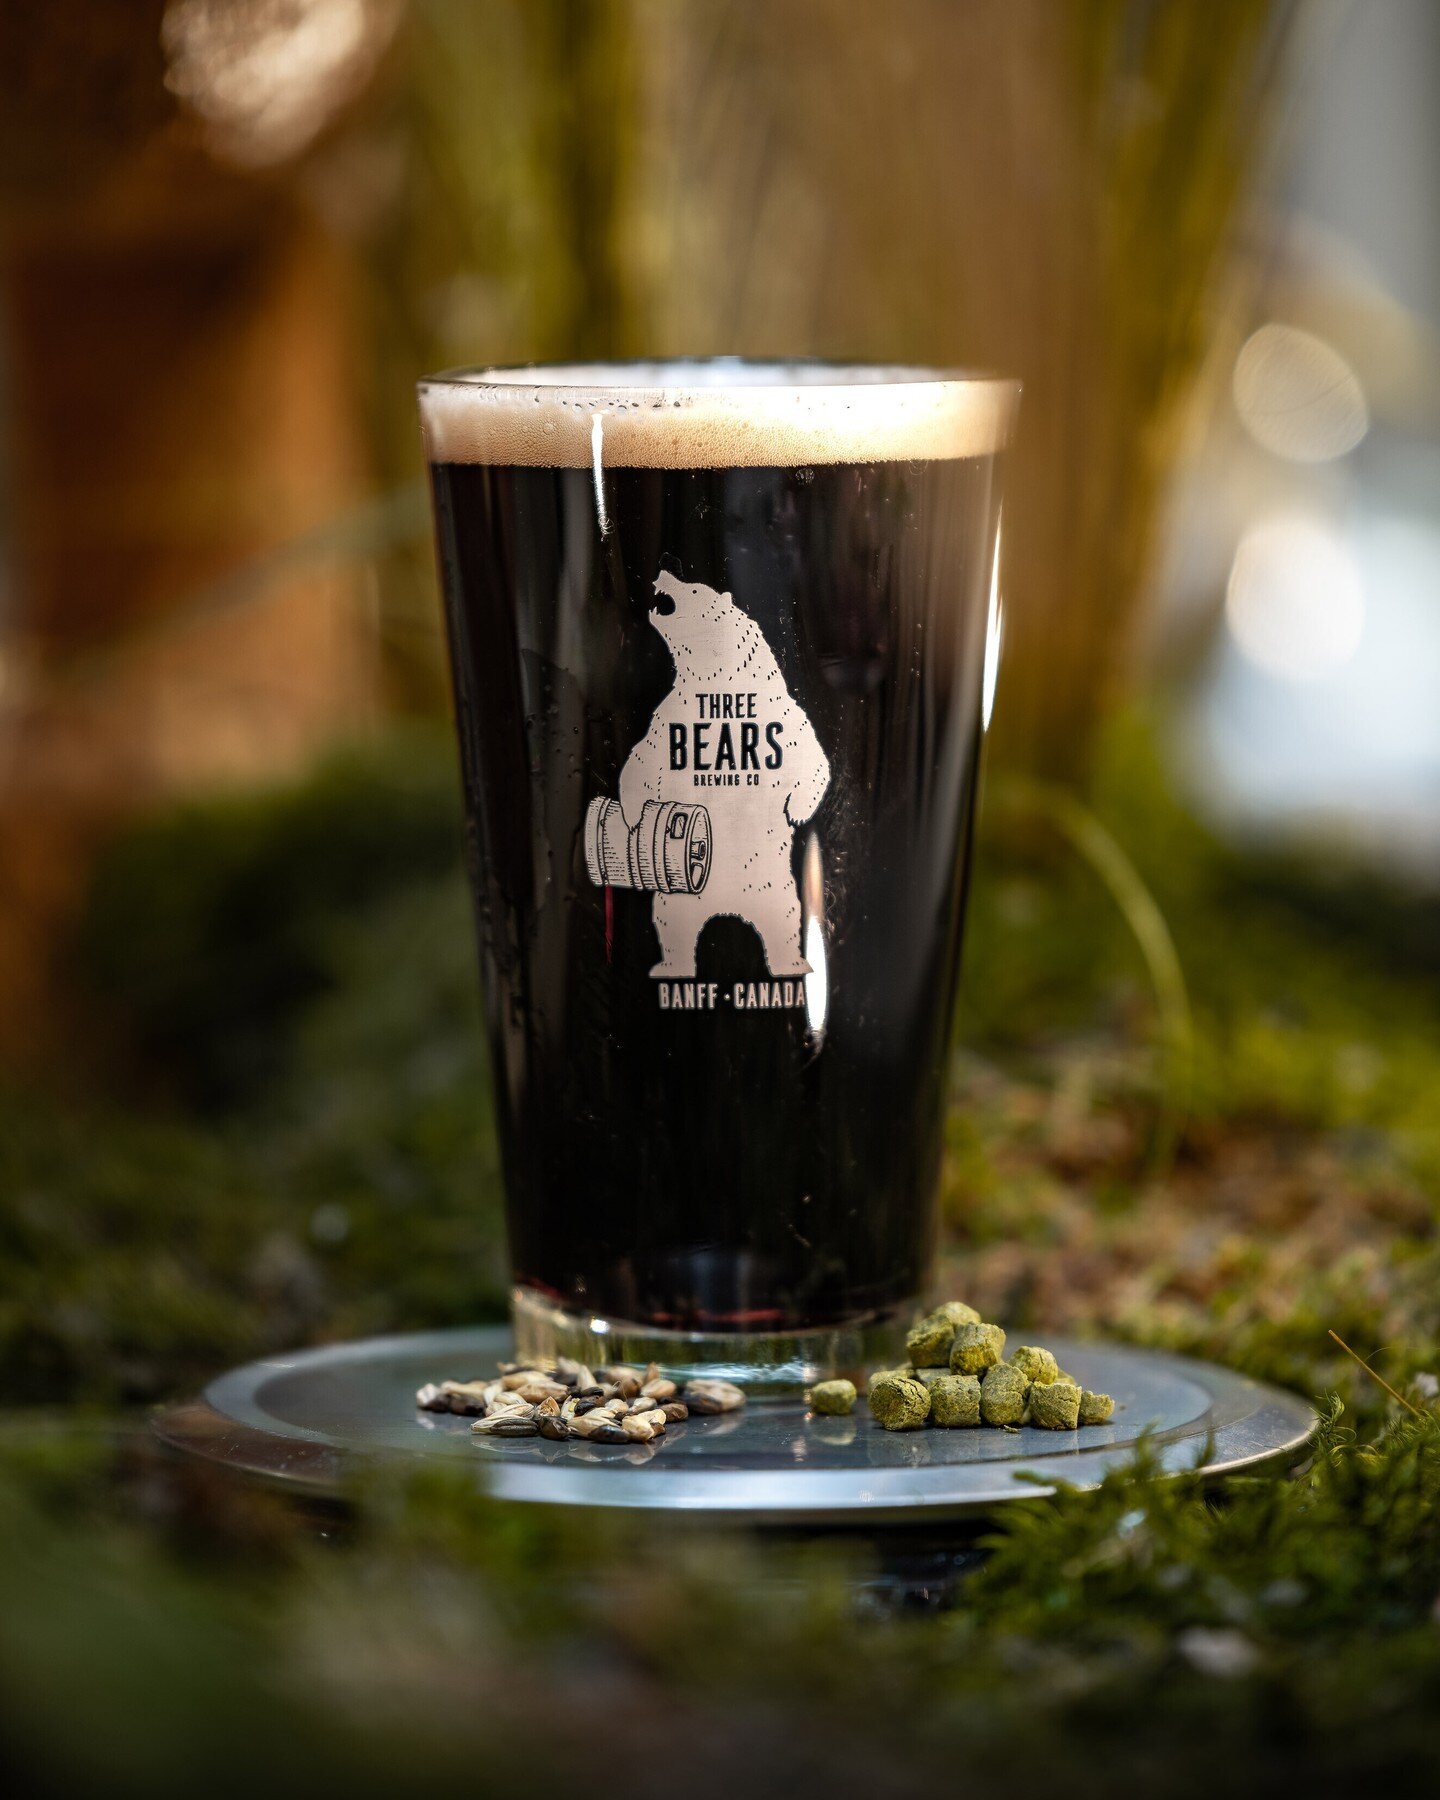 Grab a pint and help a great cause!
&lsquo;Original Gravity&rsquo; Oatmeal Gingerbread Stout, $1 from every pint donated to @ywcabanff
An oatmeal stout conditioned on ginger, cinnamon and cloves.
ABV 6.5% / IBU 18

Only around for a limited time so y